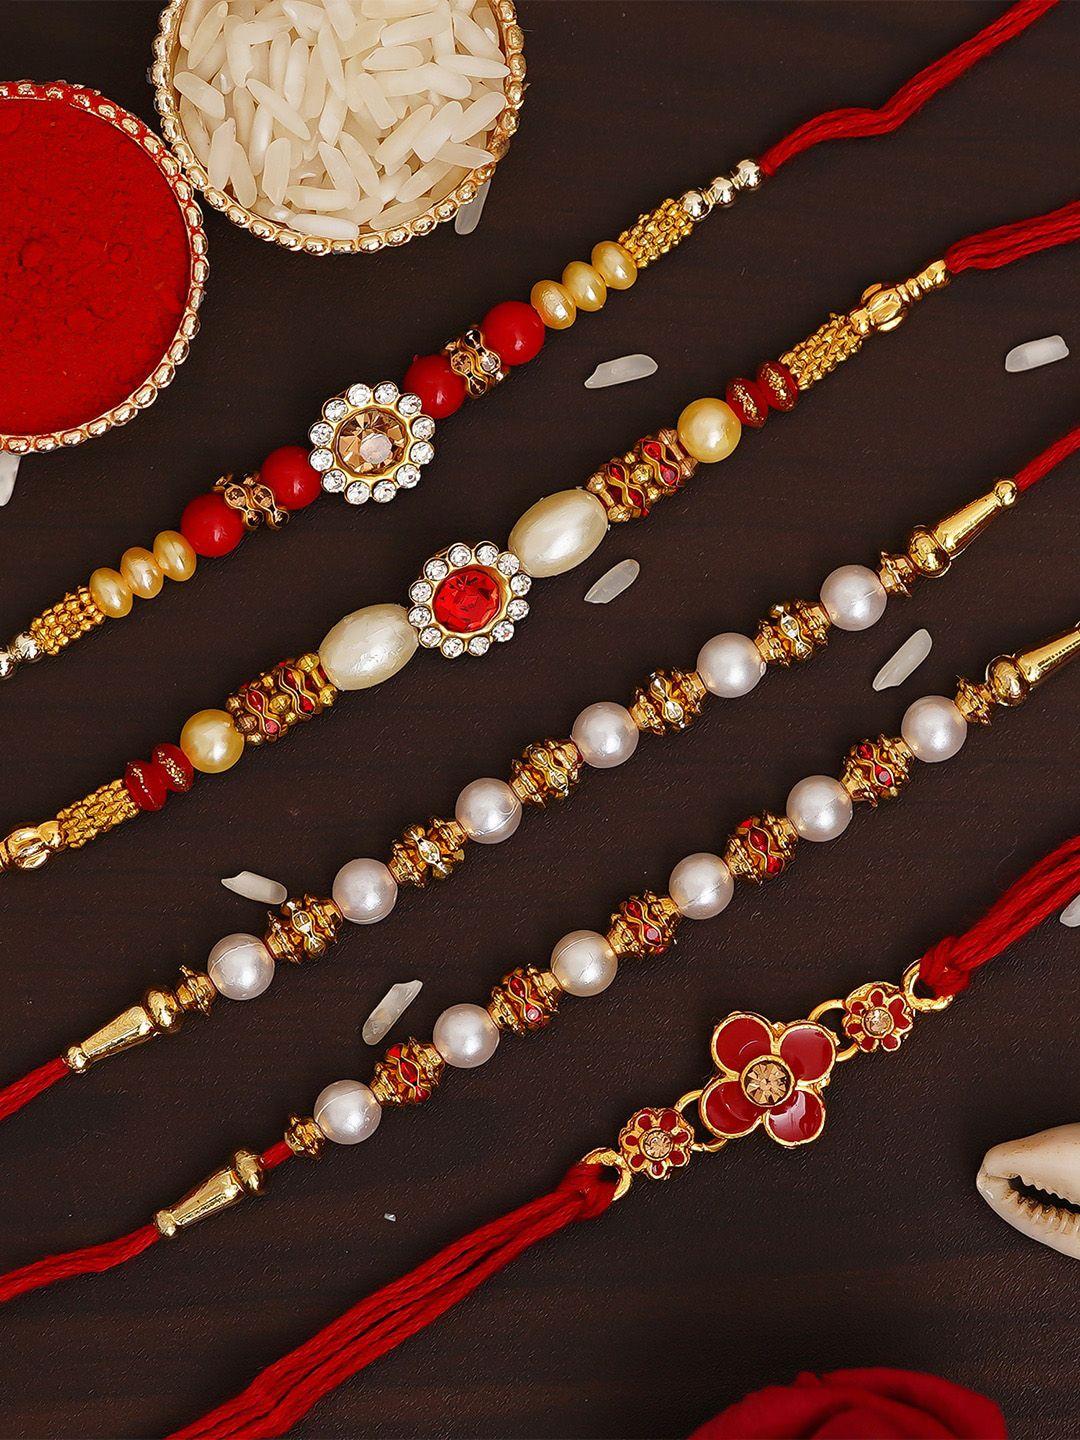 ecraftindia set of 5 red & gold-toned pearl designer rakhi with roli chawal pack